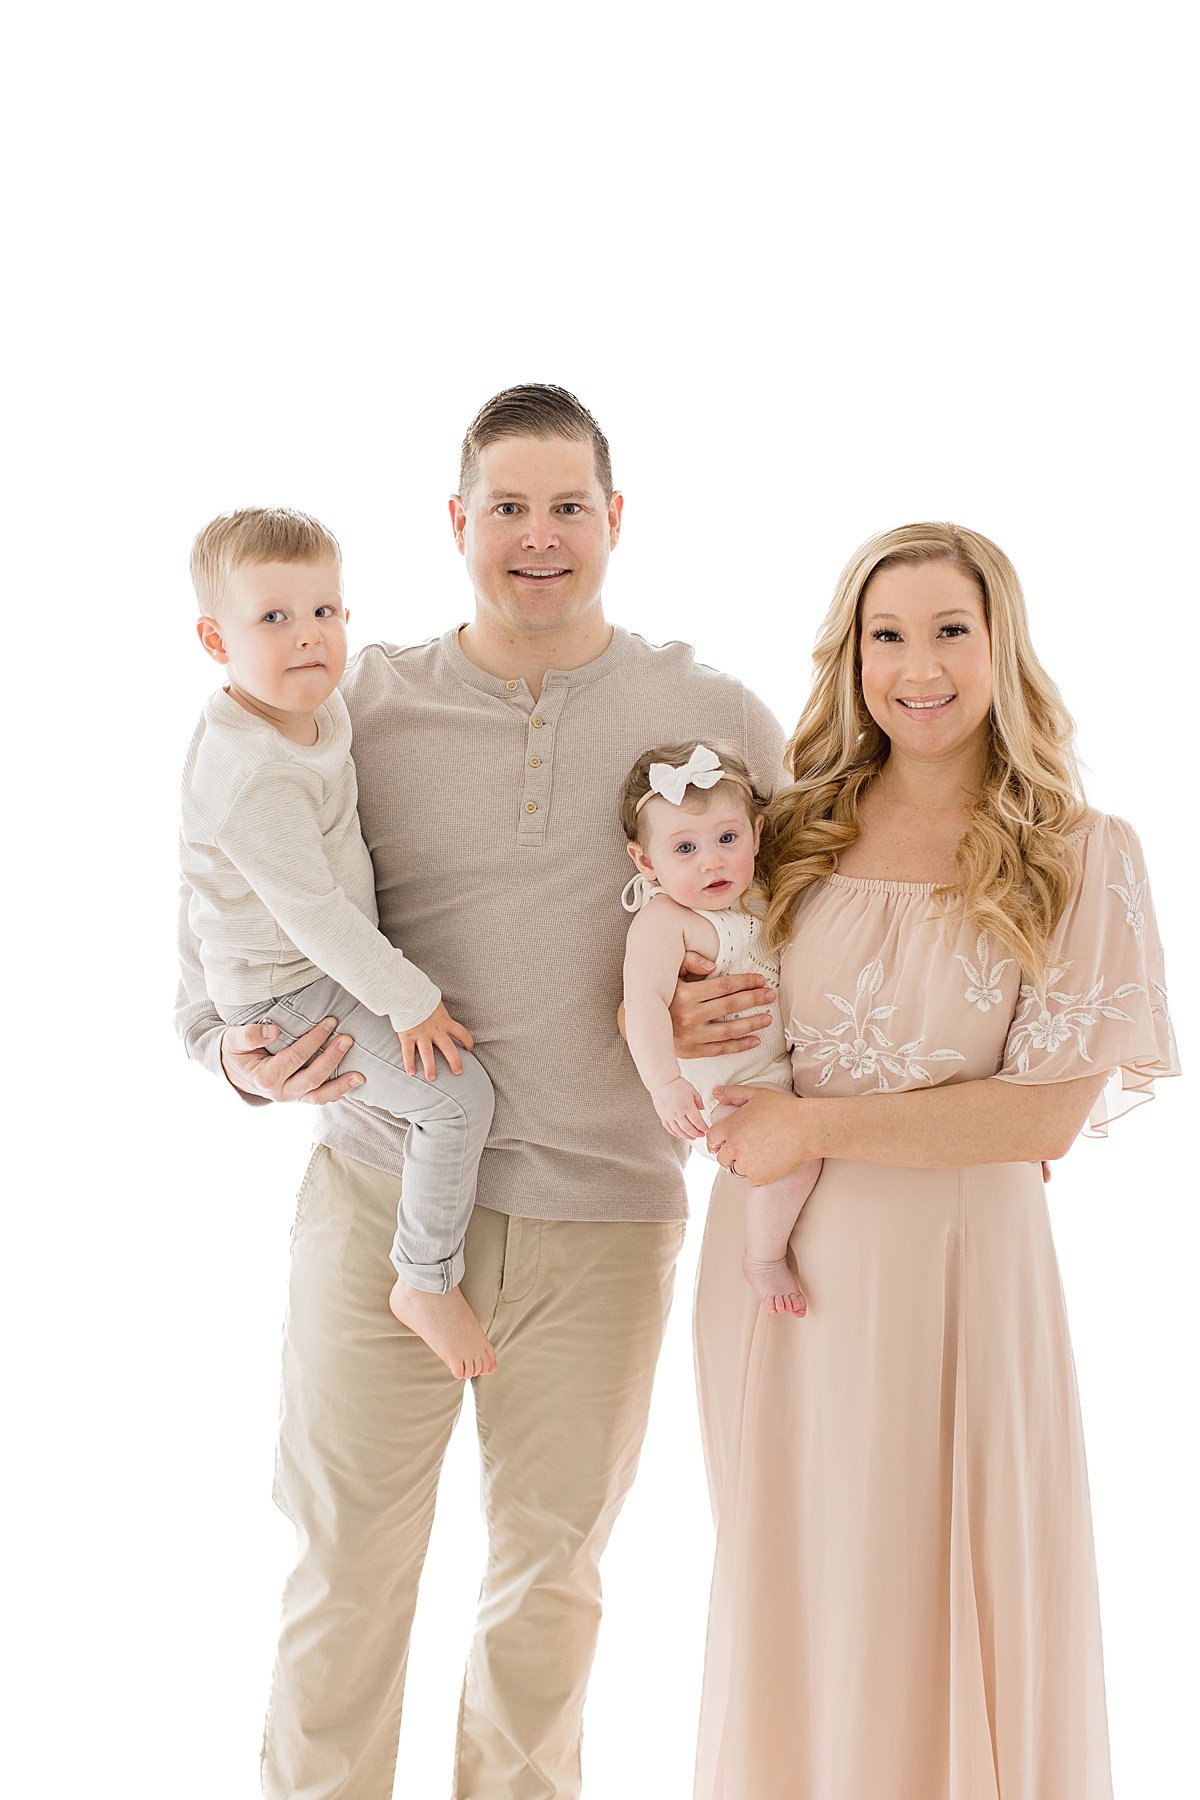 Family portrait session with Mom, Dad, and two children during six-month sitter milestone session | Newport Beach Photographer Ambre Williams